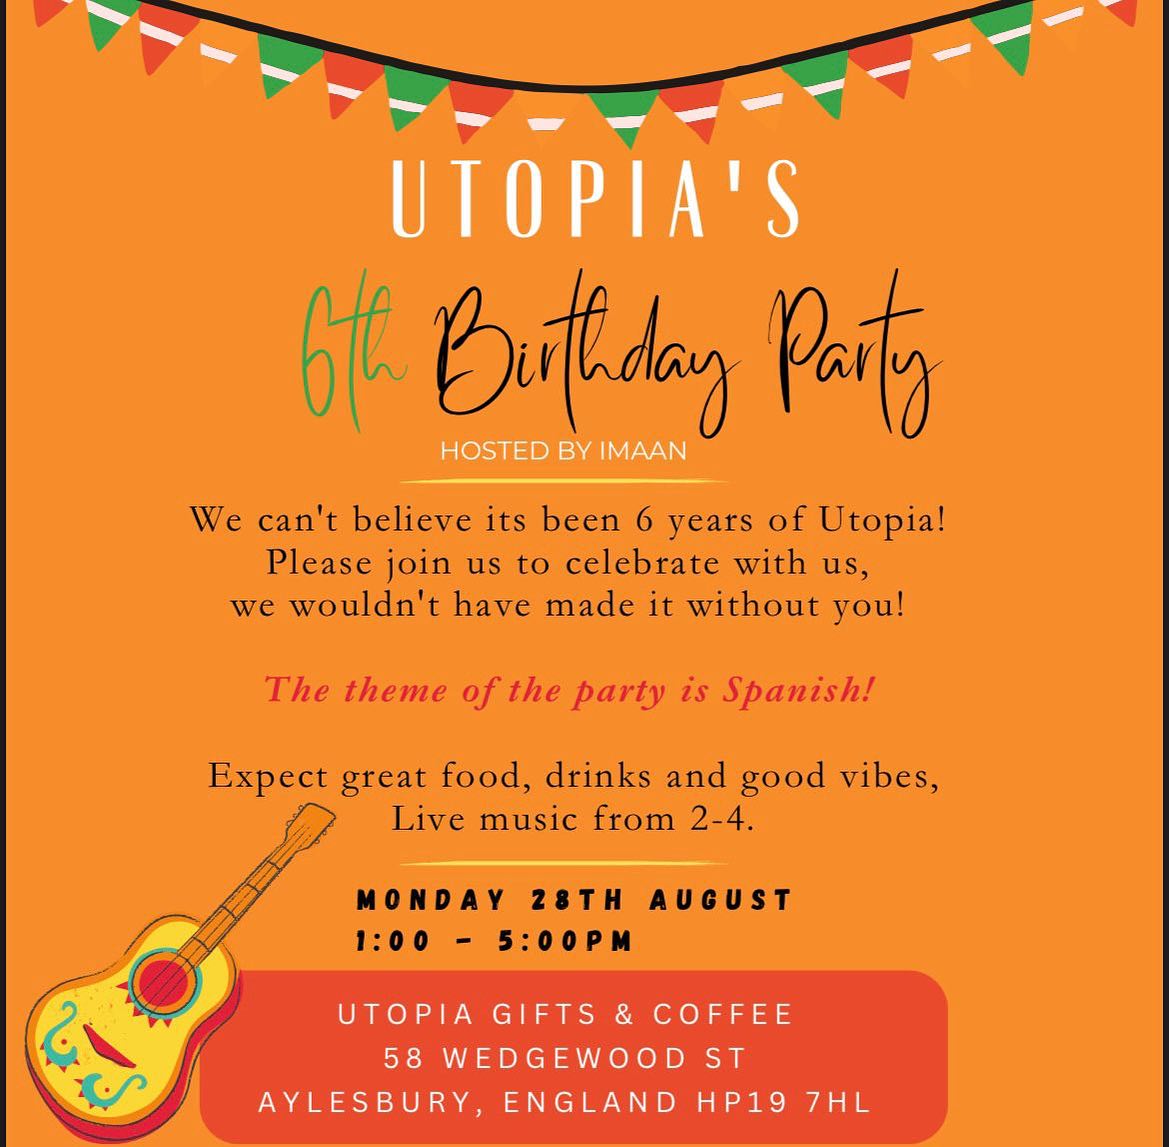 Utopia Gifts and Coffee